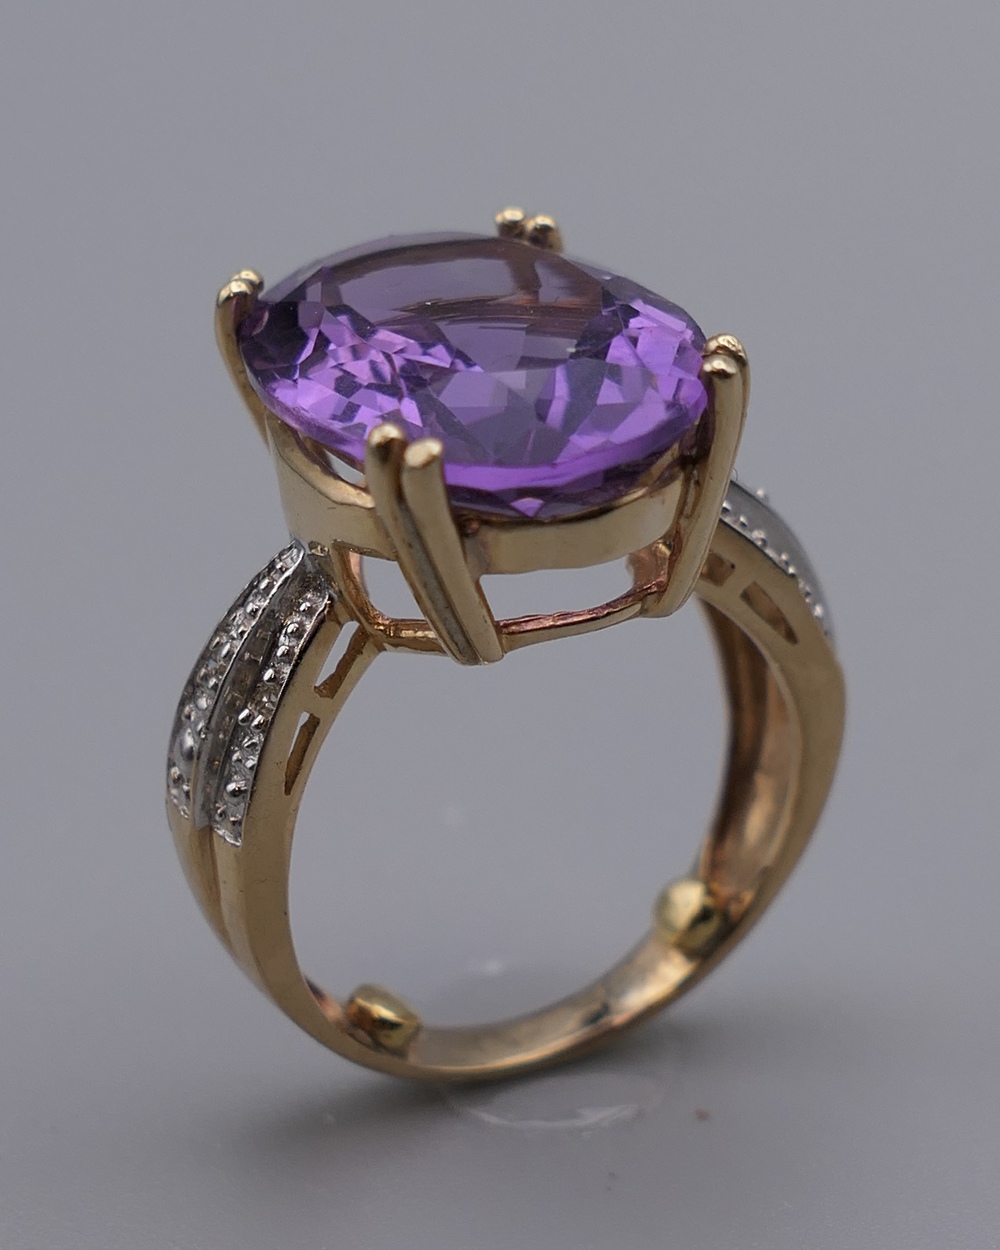 A 9 ct gold, amethyst and diamond ring. Ring size L/M. - Image 2 of 5